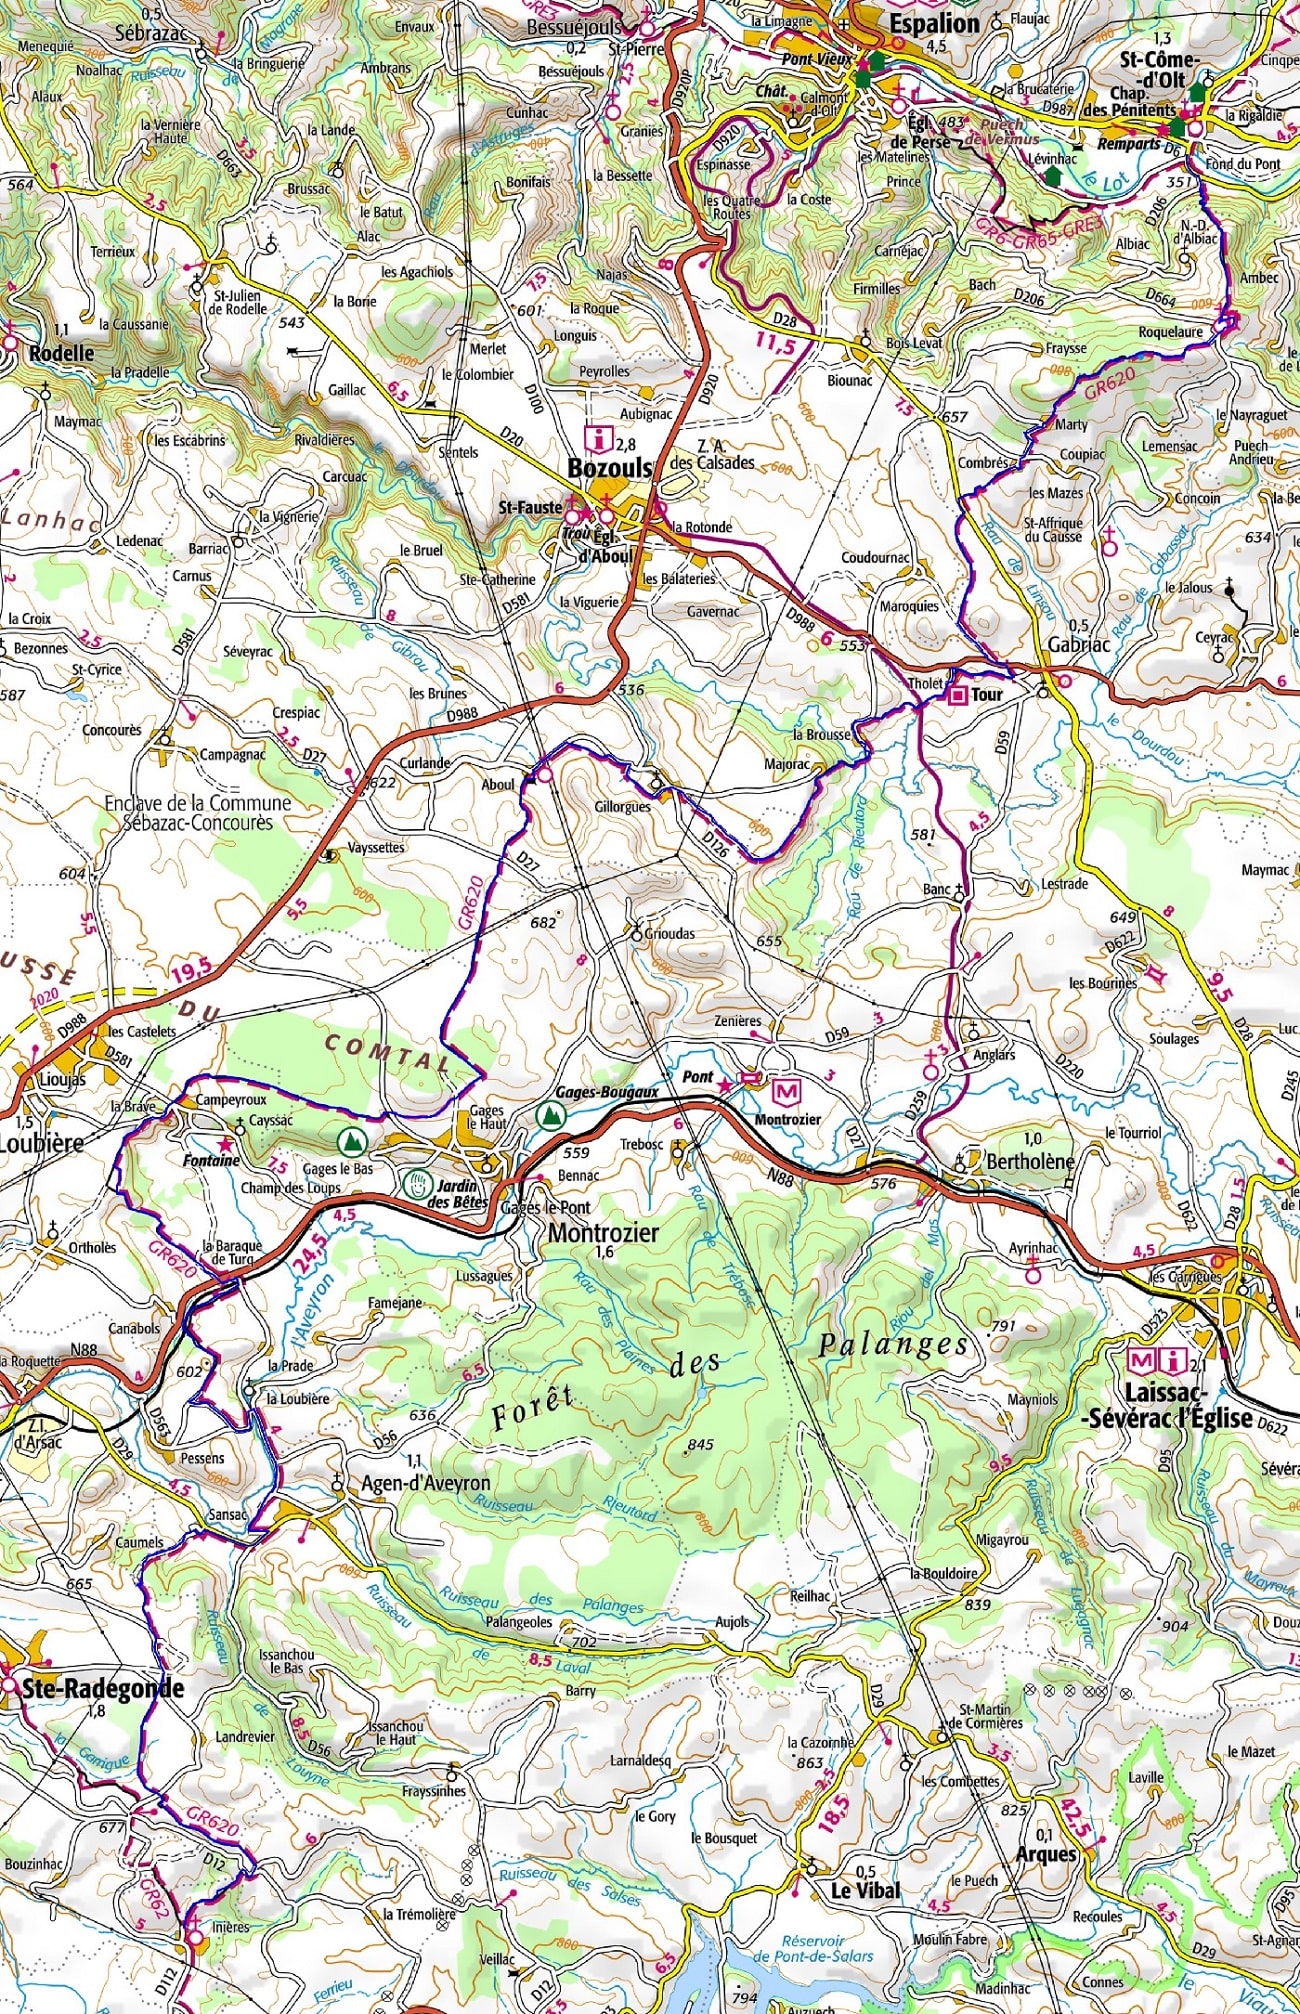 GR620 Hiking from St Come d'Olt to Inieres (Aveyron) 1